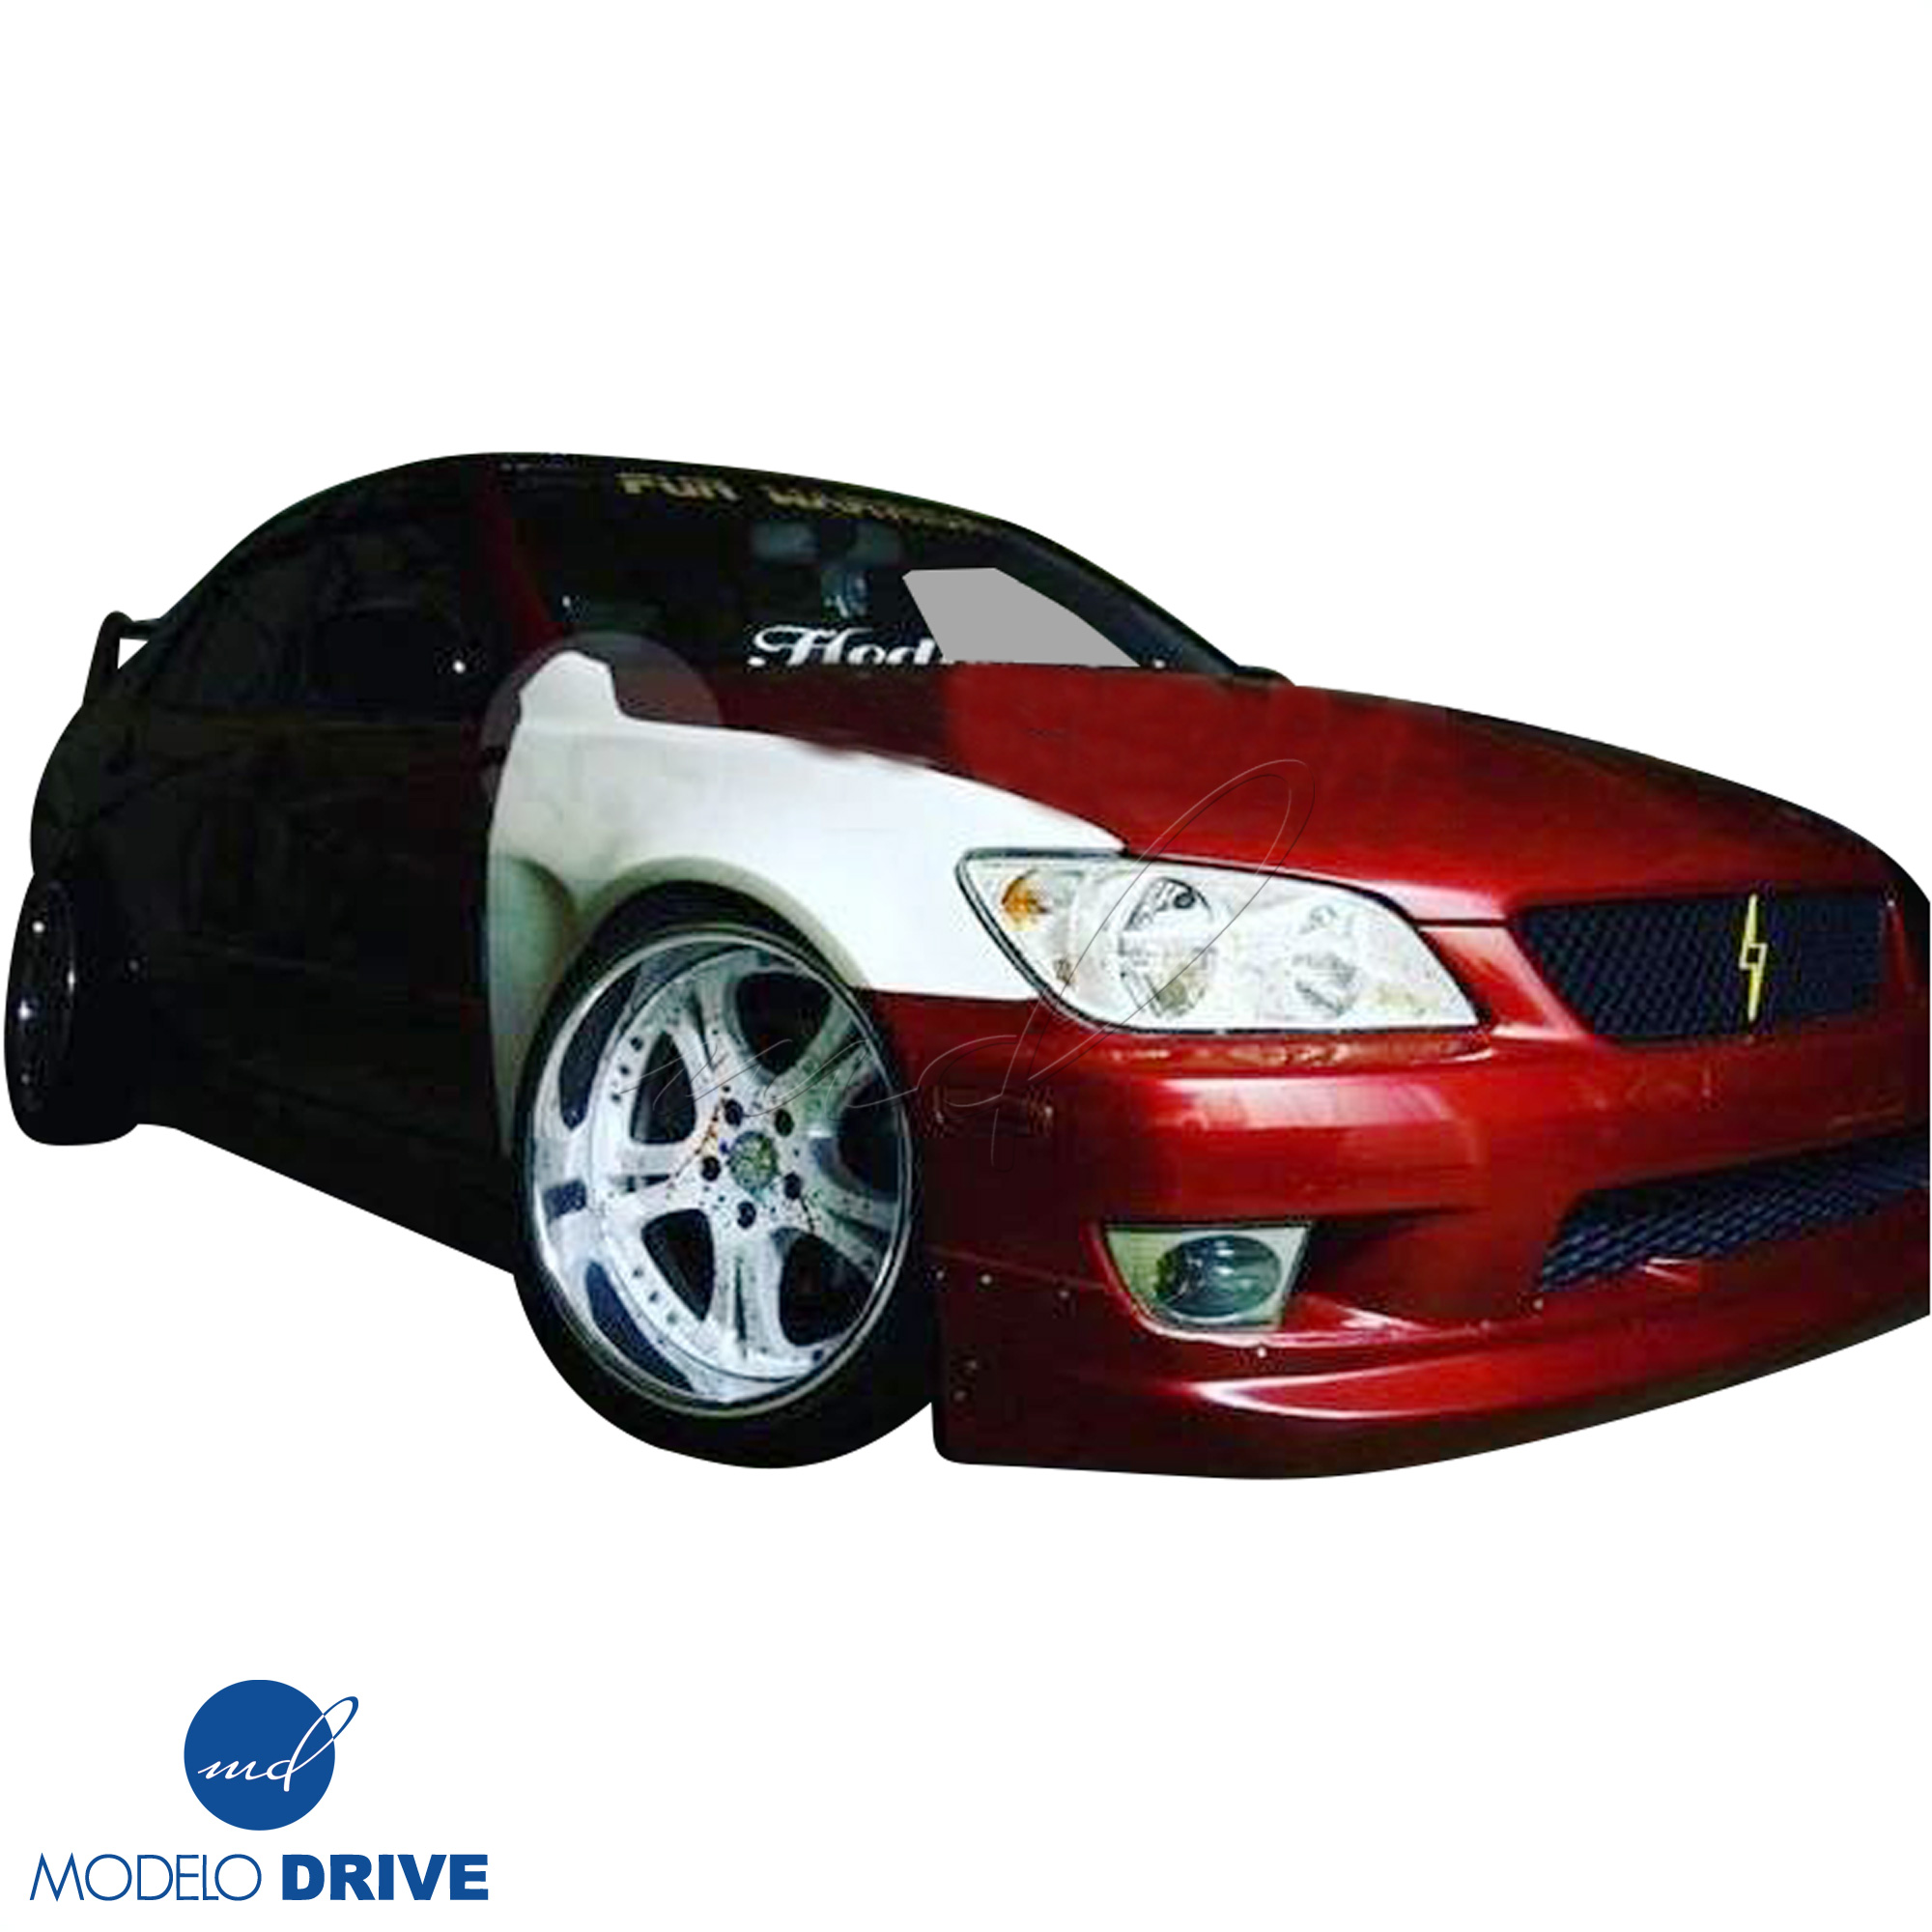 ModeloDrive FRP MSV Wide Body 30mm Fenders (front) 2pc > Lexus IS300 2000-2005> 4dr - Image 20